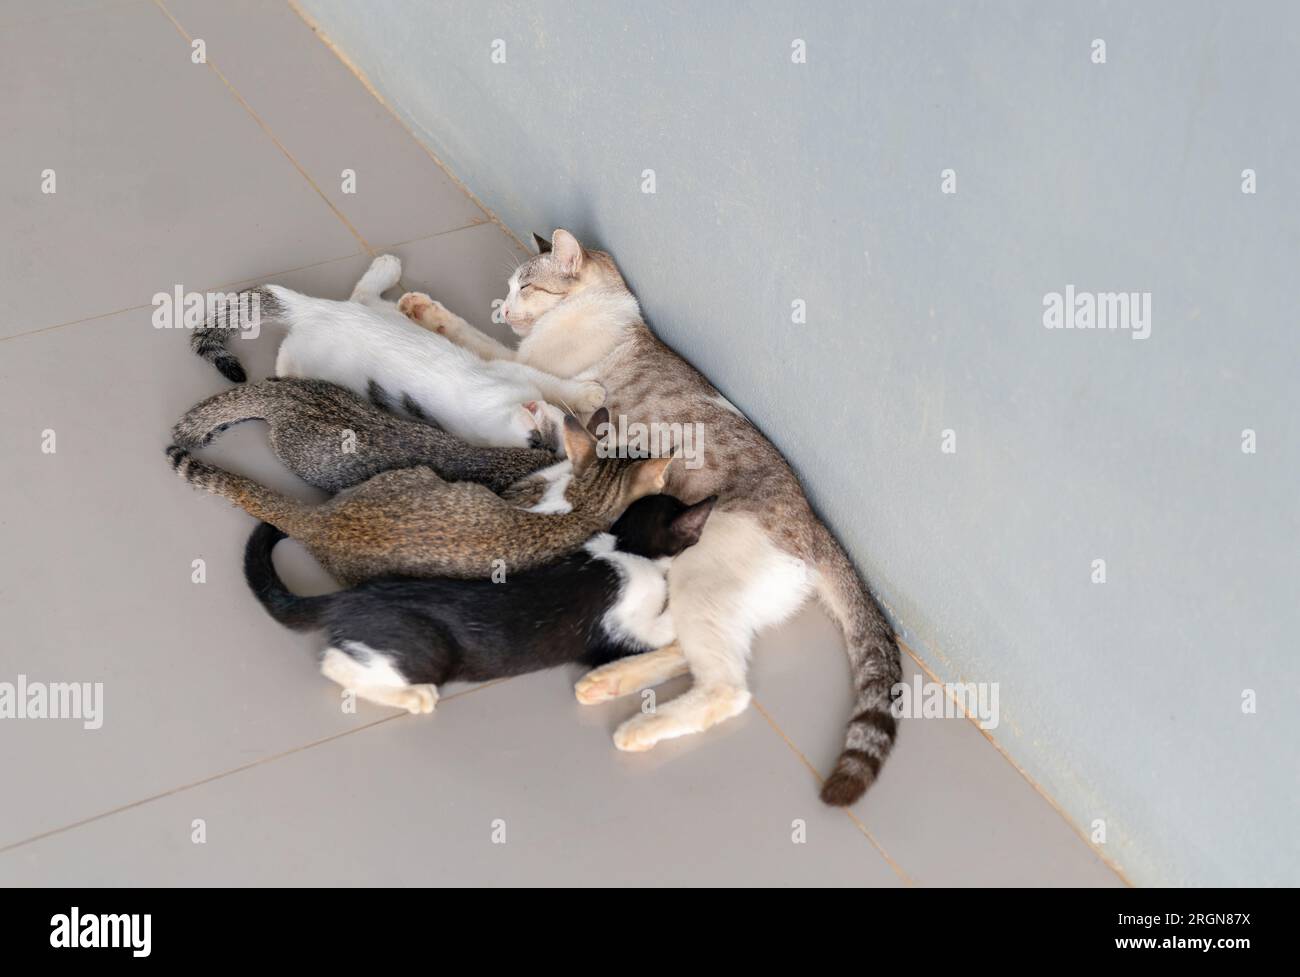 Mother cat nursing and feeding baby kittens at home. Stock Photo